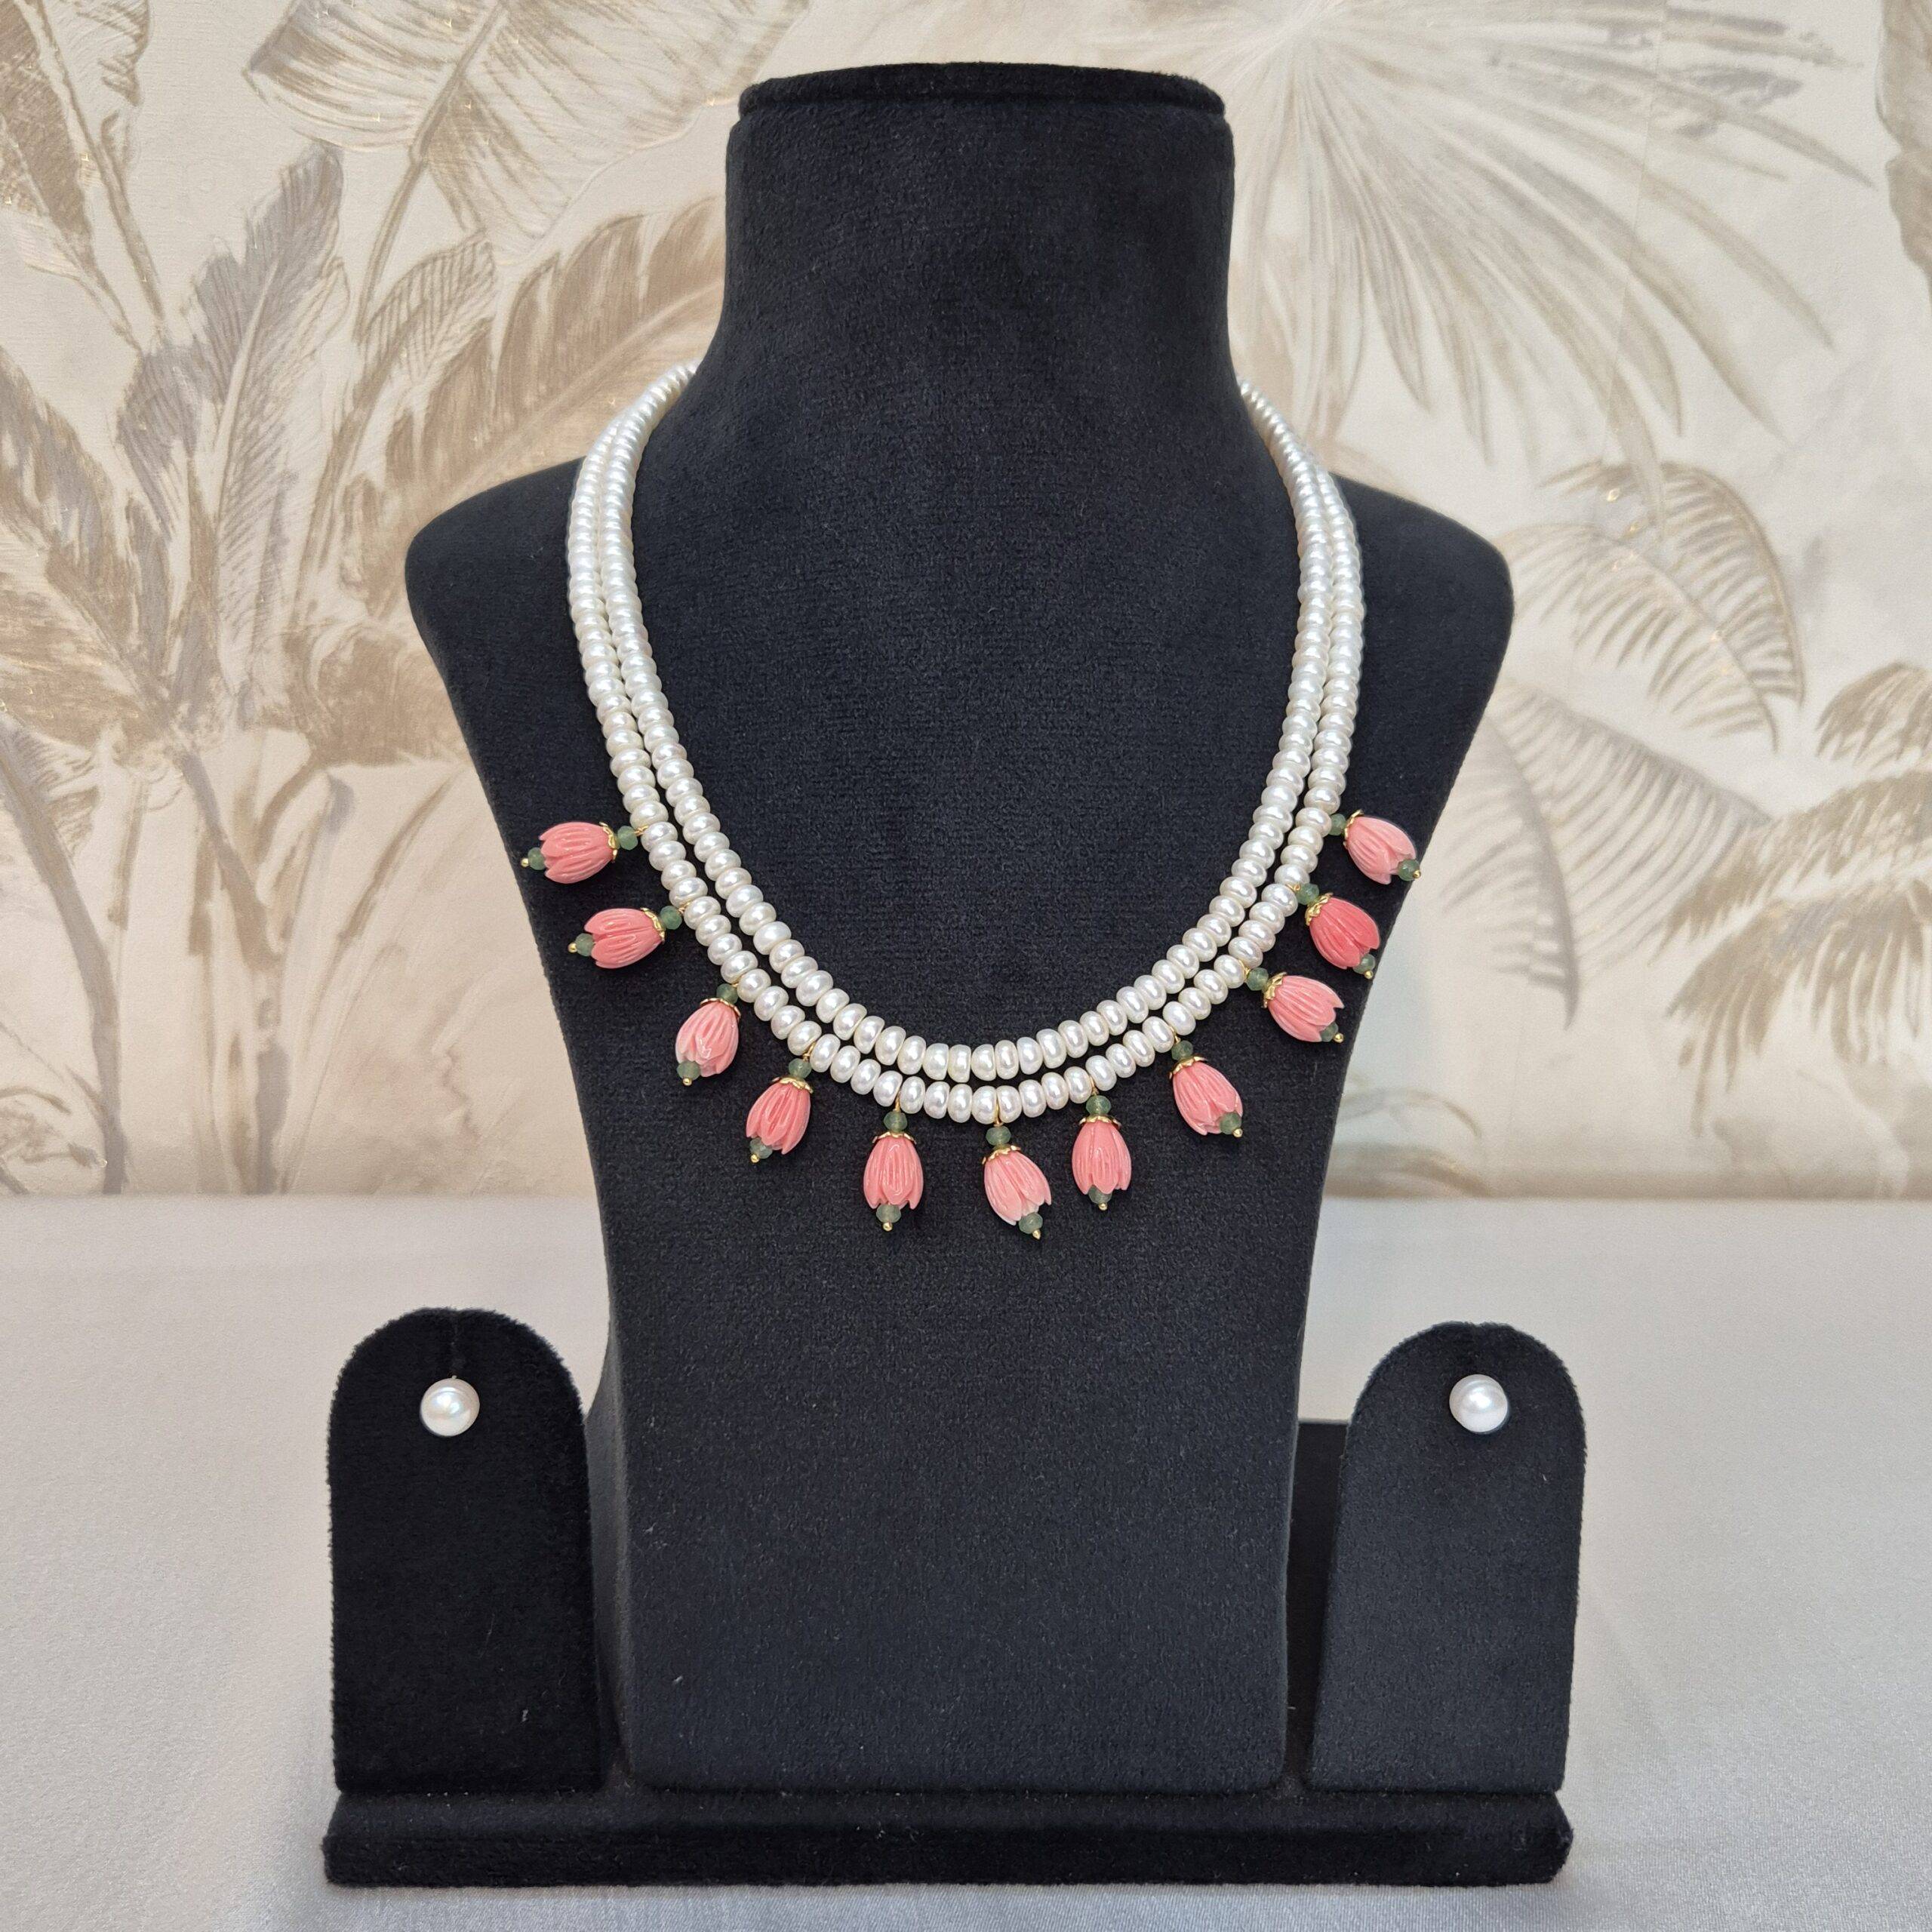 Elegant Two Row Necklace With 5.5mm White Semi-Round Pearls & Corals